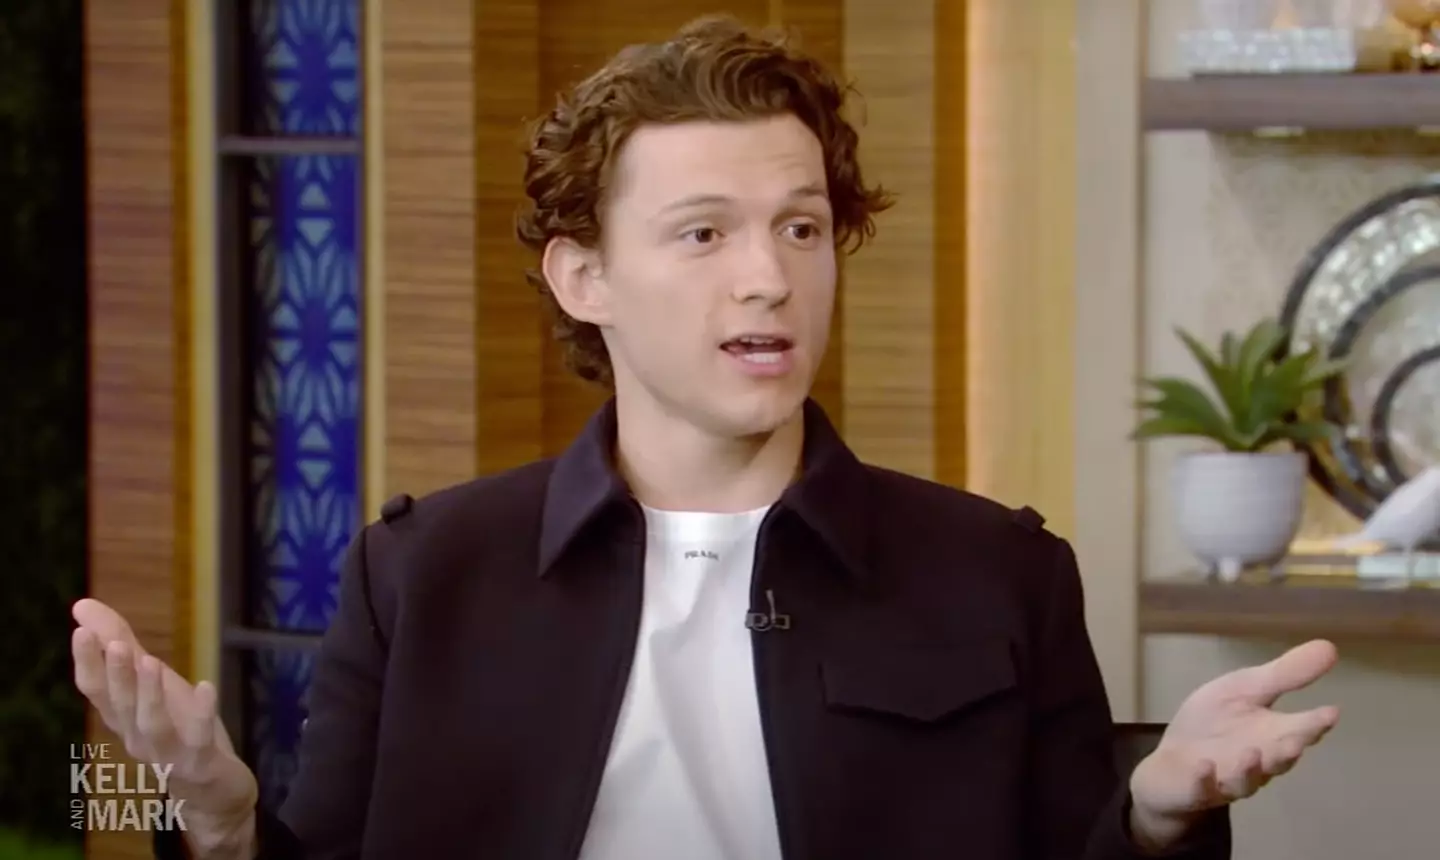 Tom Holland has a famous dad.